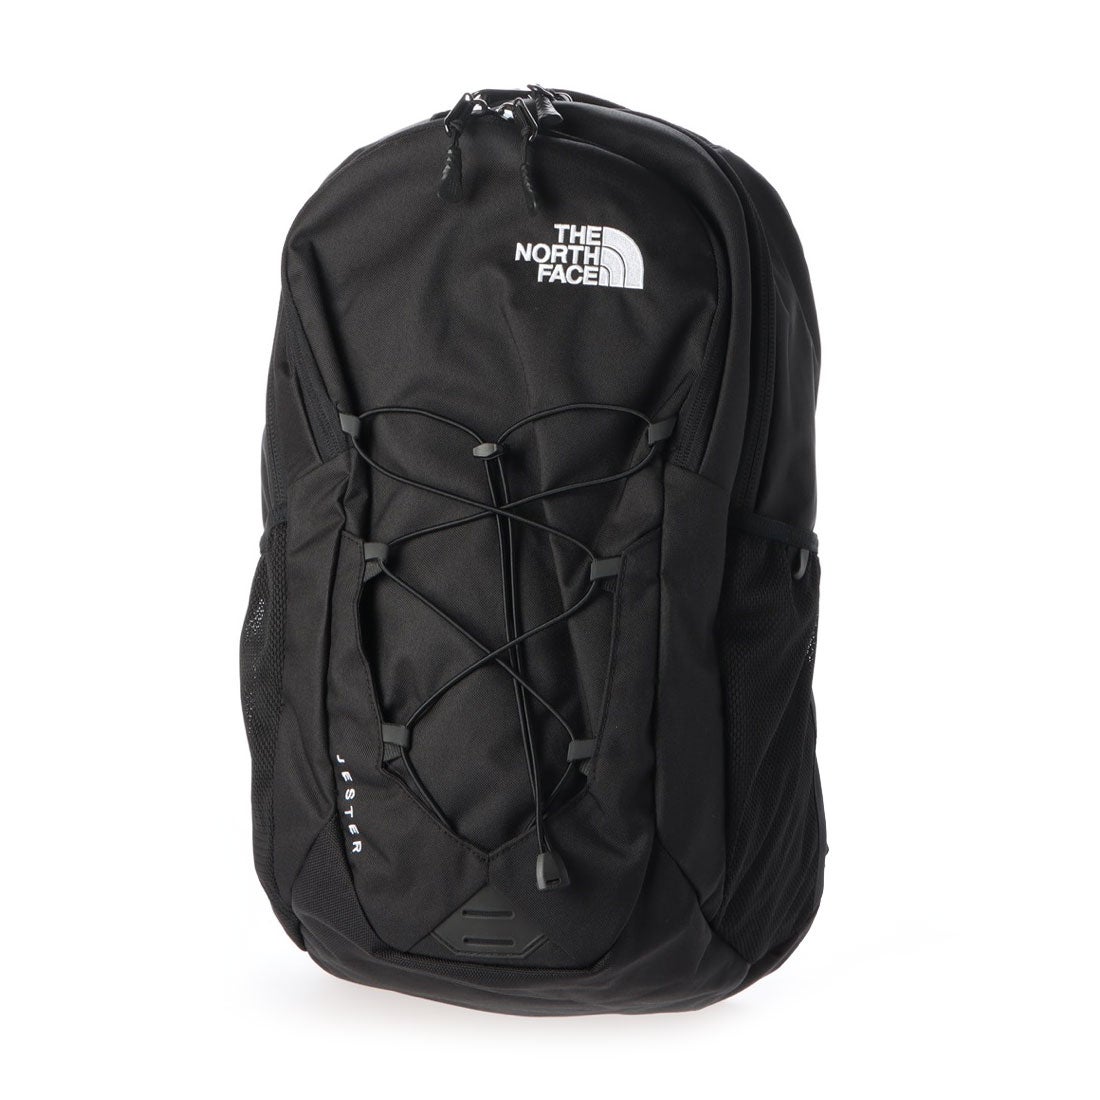 THE NORTH FACE リュック JESTER